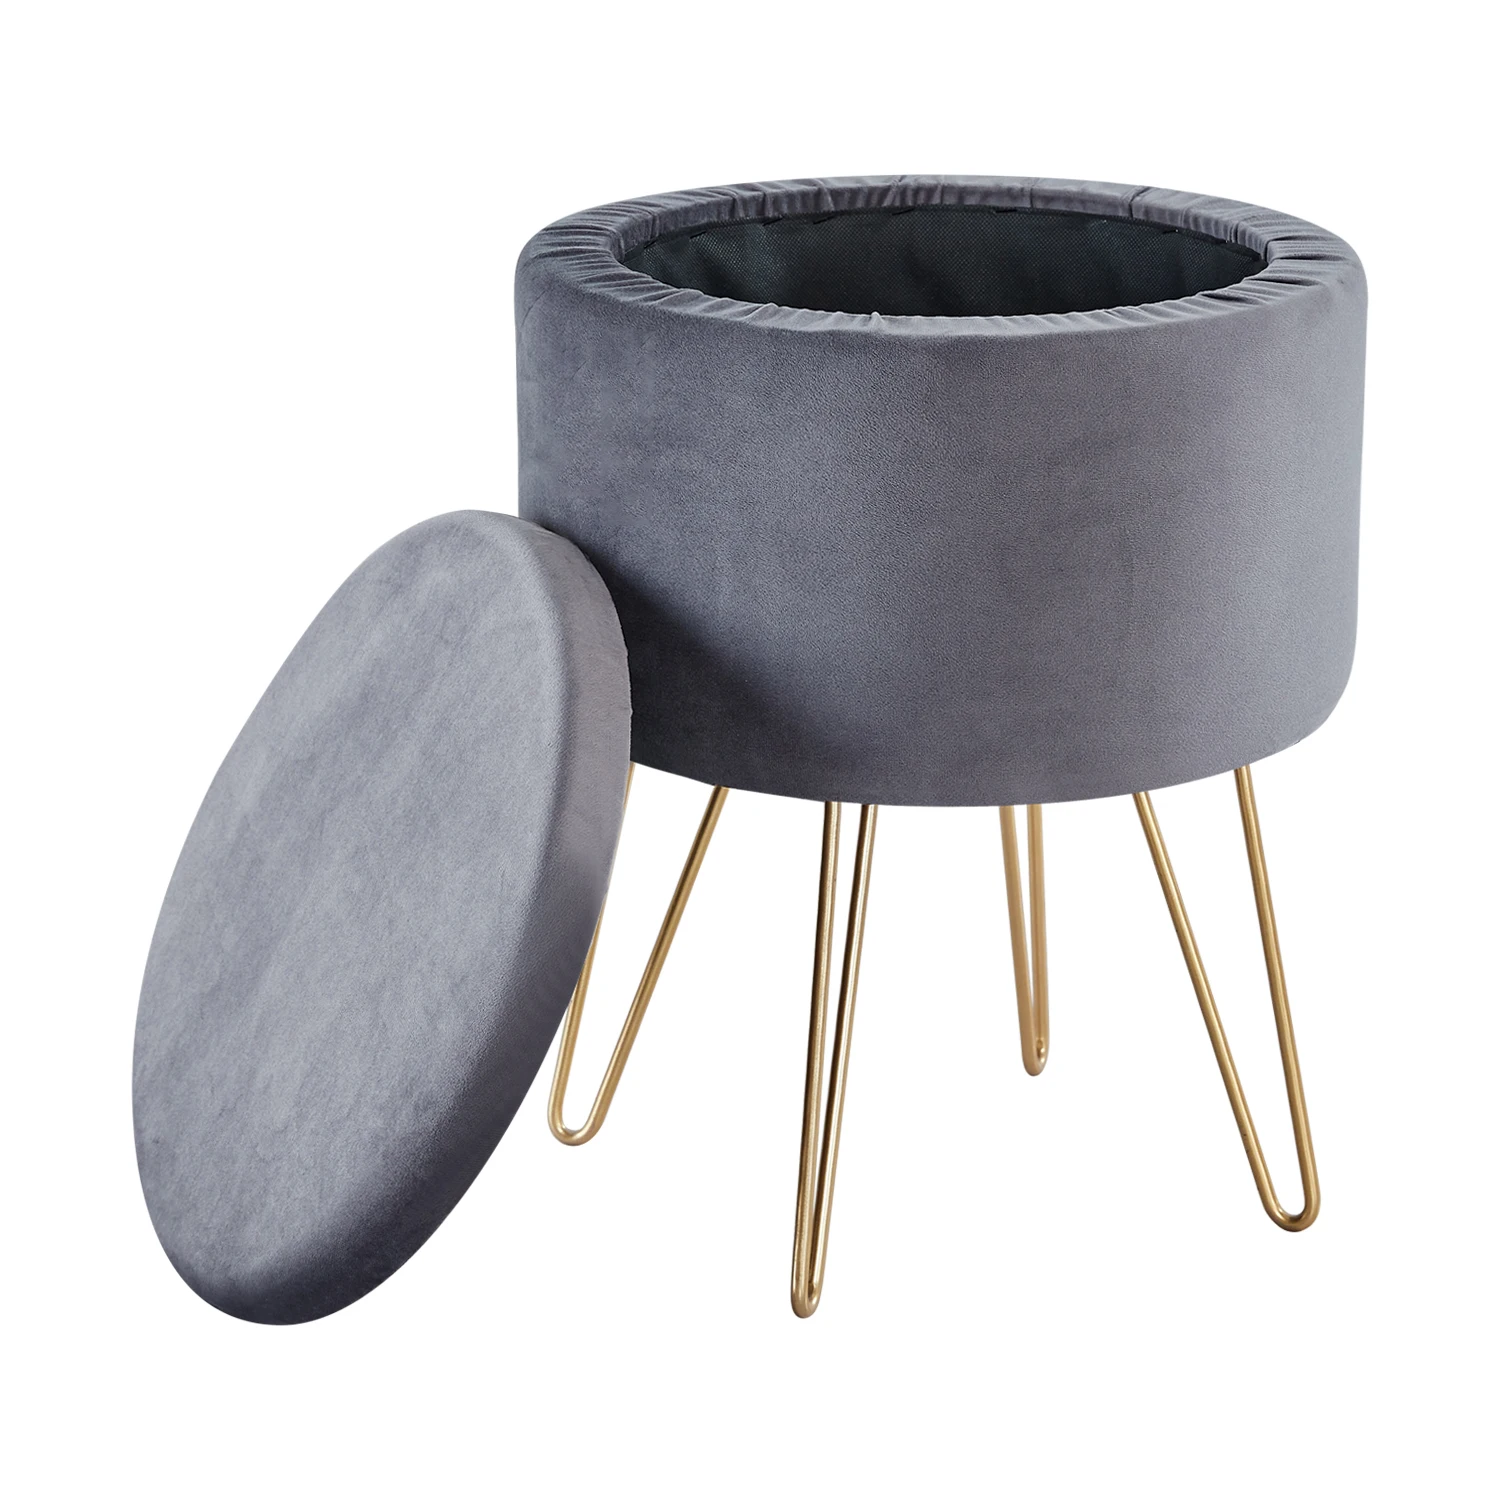 

Round Velvet Footrest Stool Ottoman, Upholstered Vanity Chair Pouffe with Storage Function Seat/Tray Top Coffee Table Seat